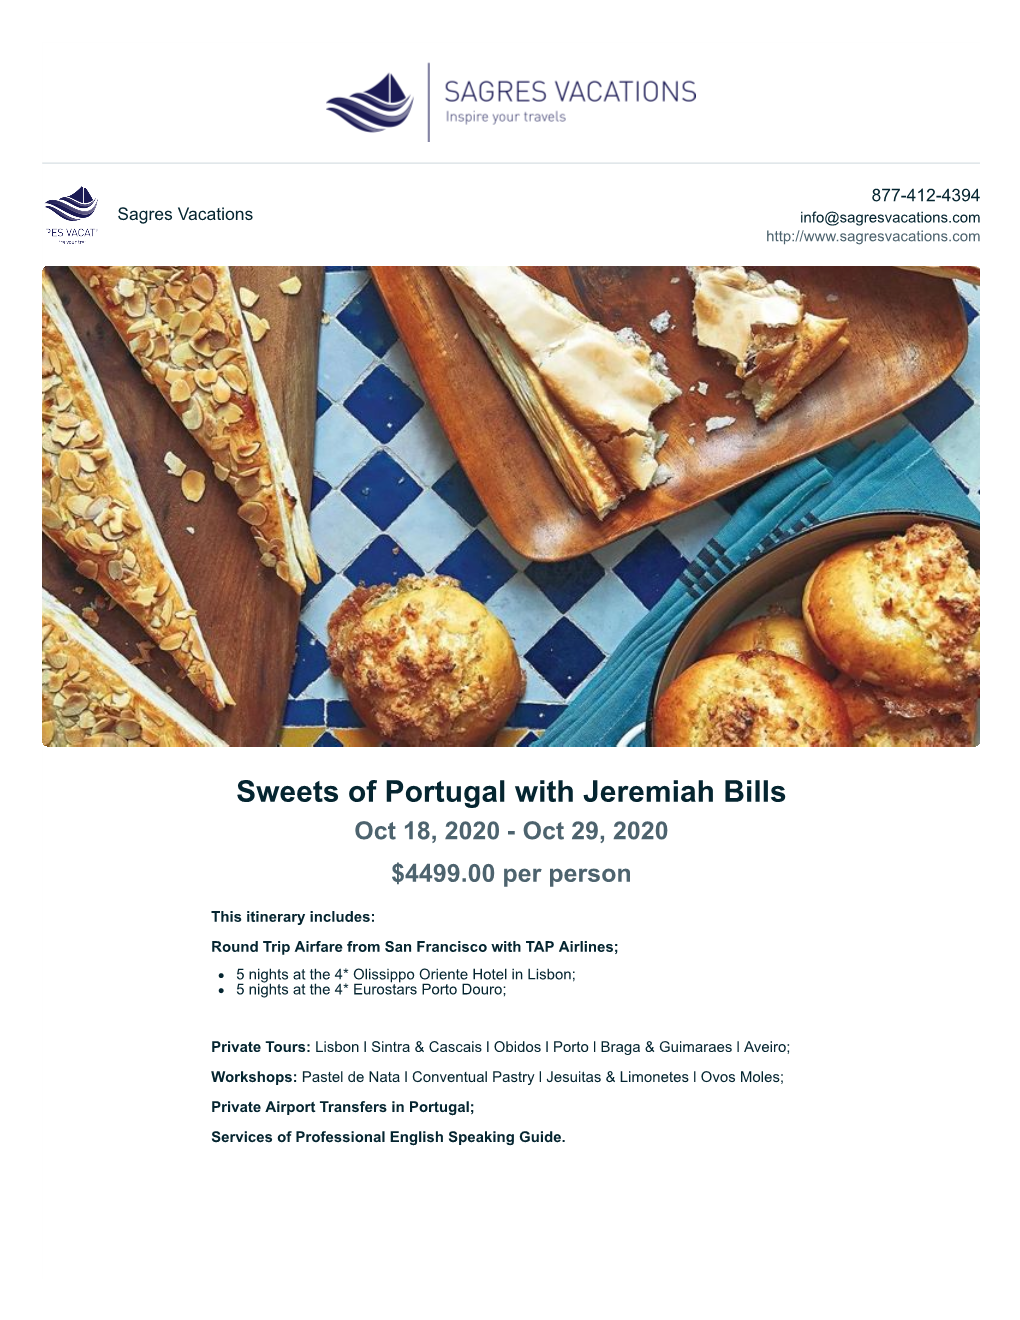 Sweets of Portugal with Jeremiah Bills Oct 18, 2020 - Oct 29, 2020 $4499.00 Per Person